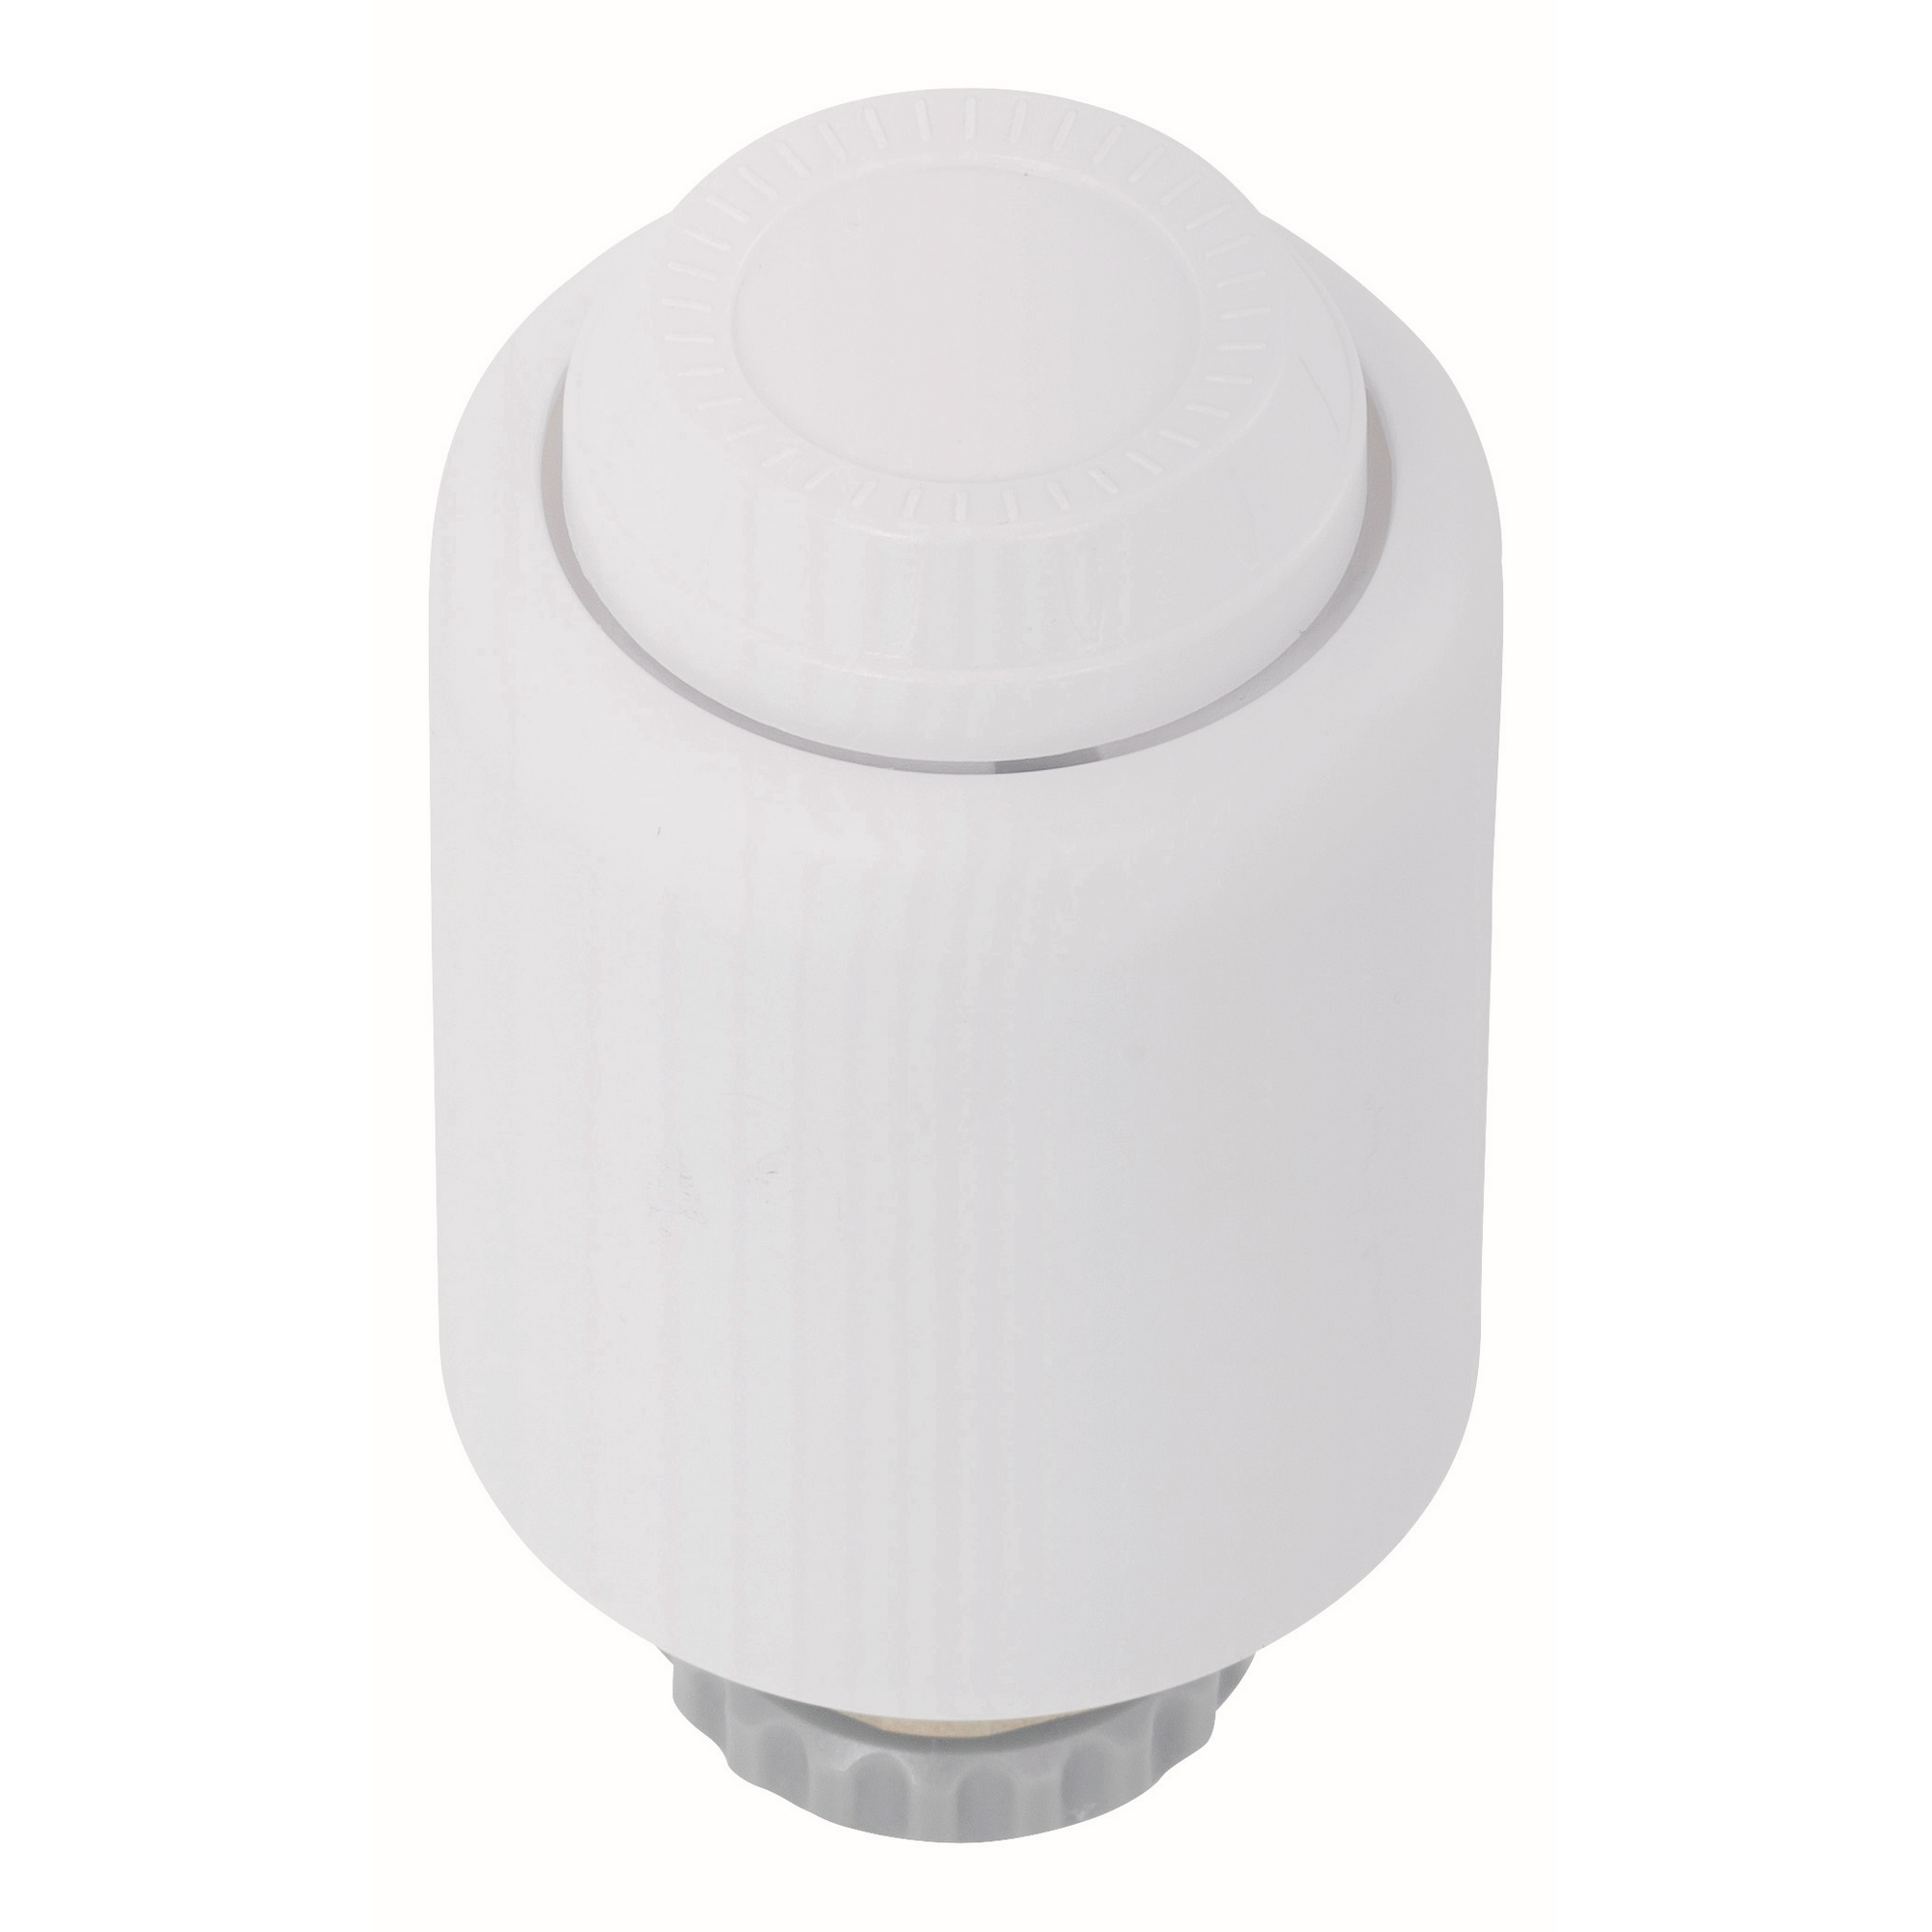 LED ZigBee Smart-Heizkörperthermostat + product picture